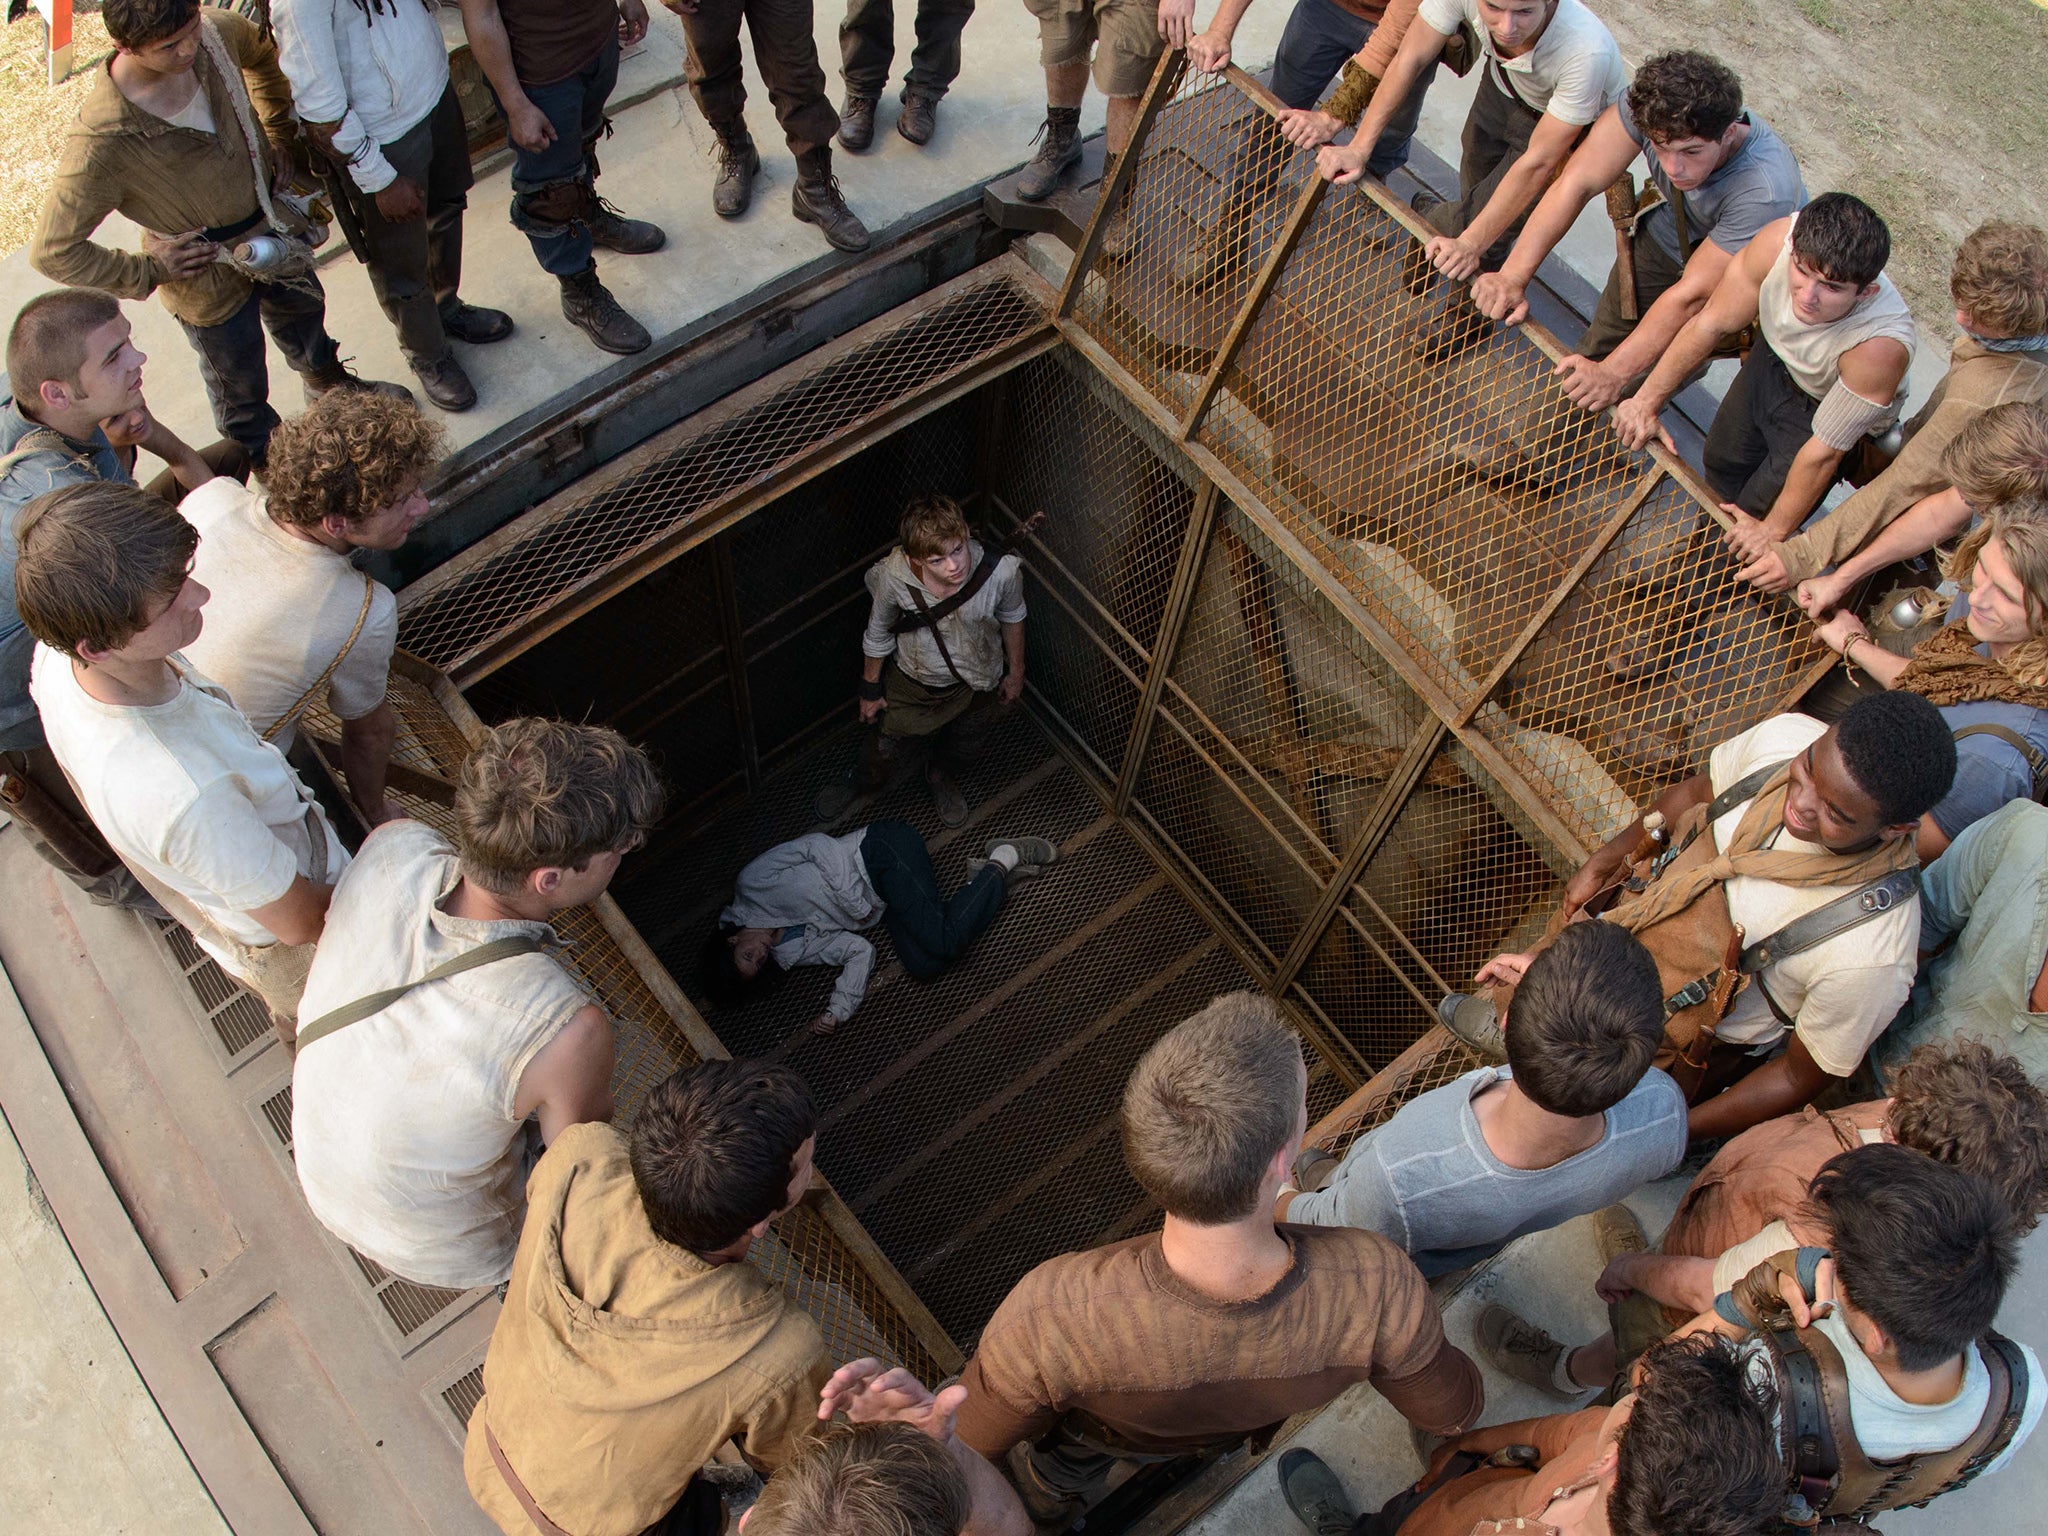 The Maze Runner, film review: Decent action sequences but many